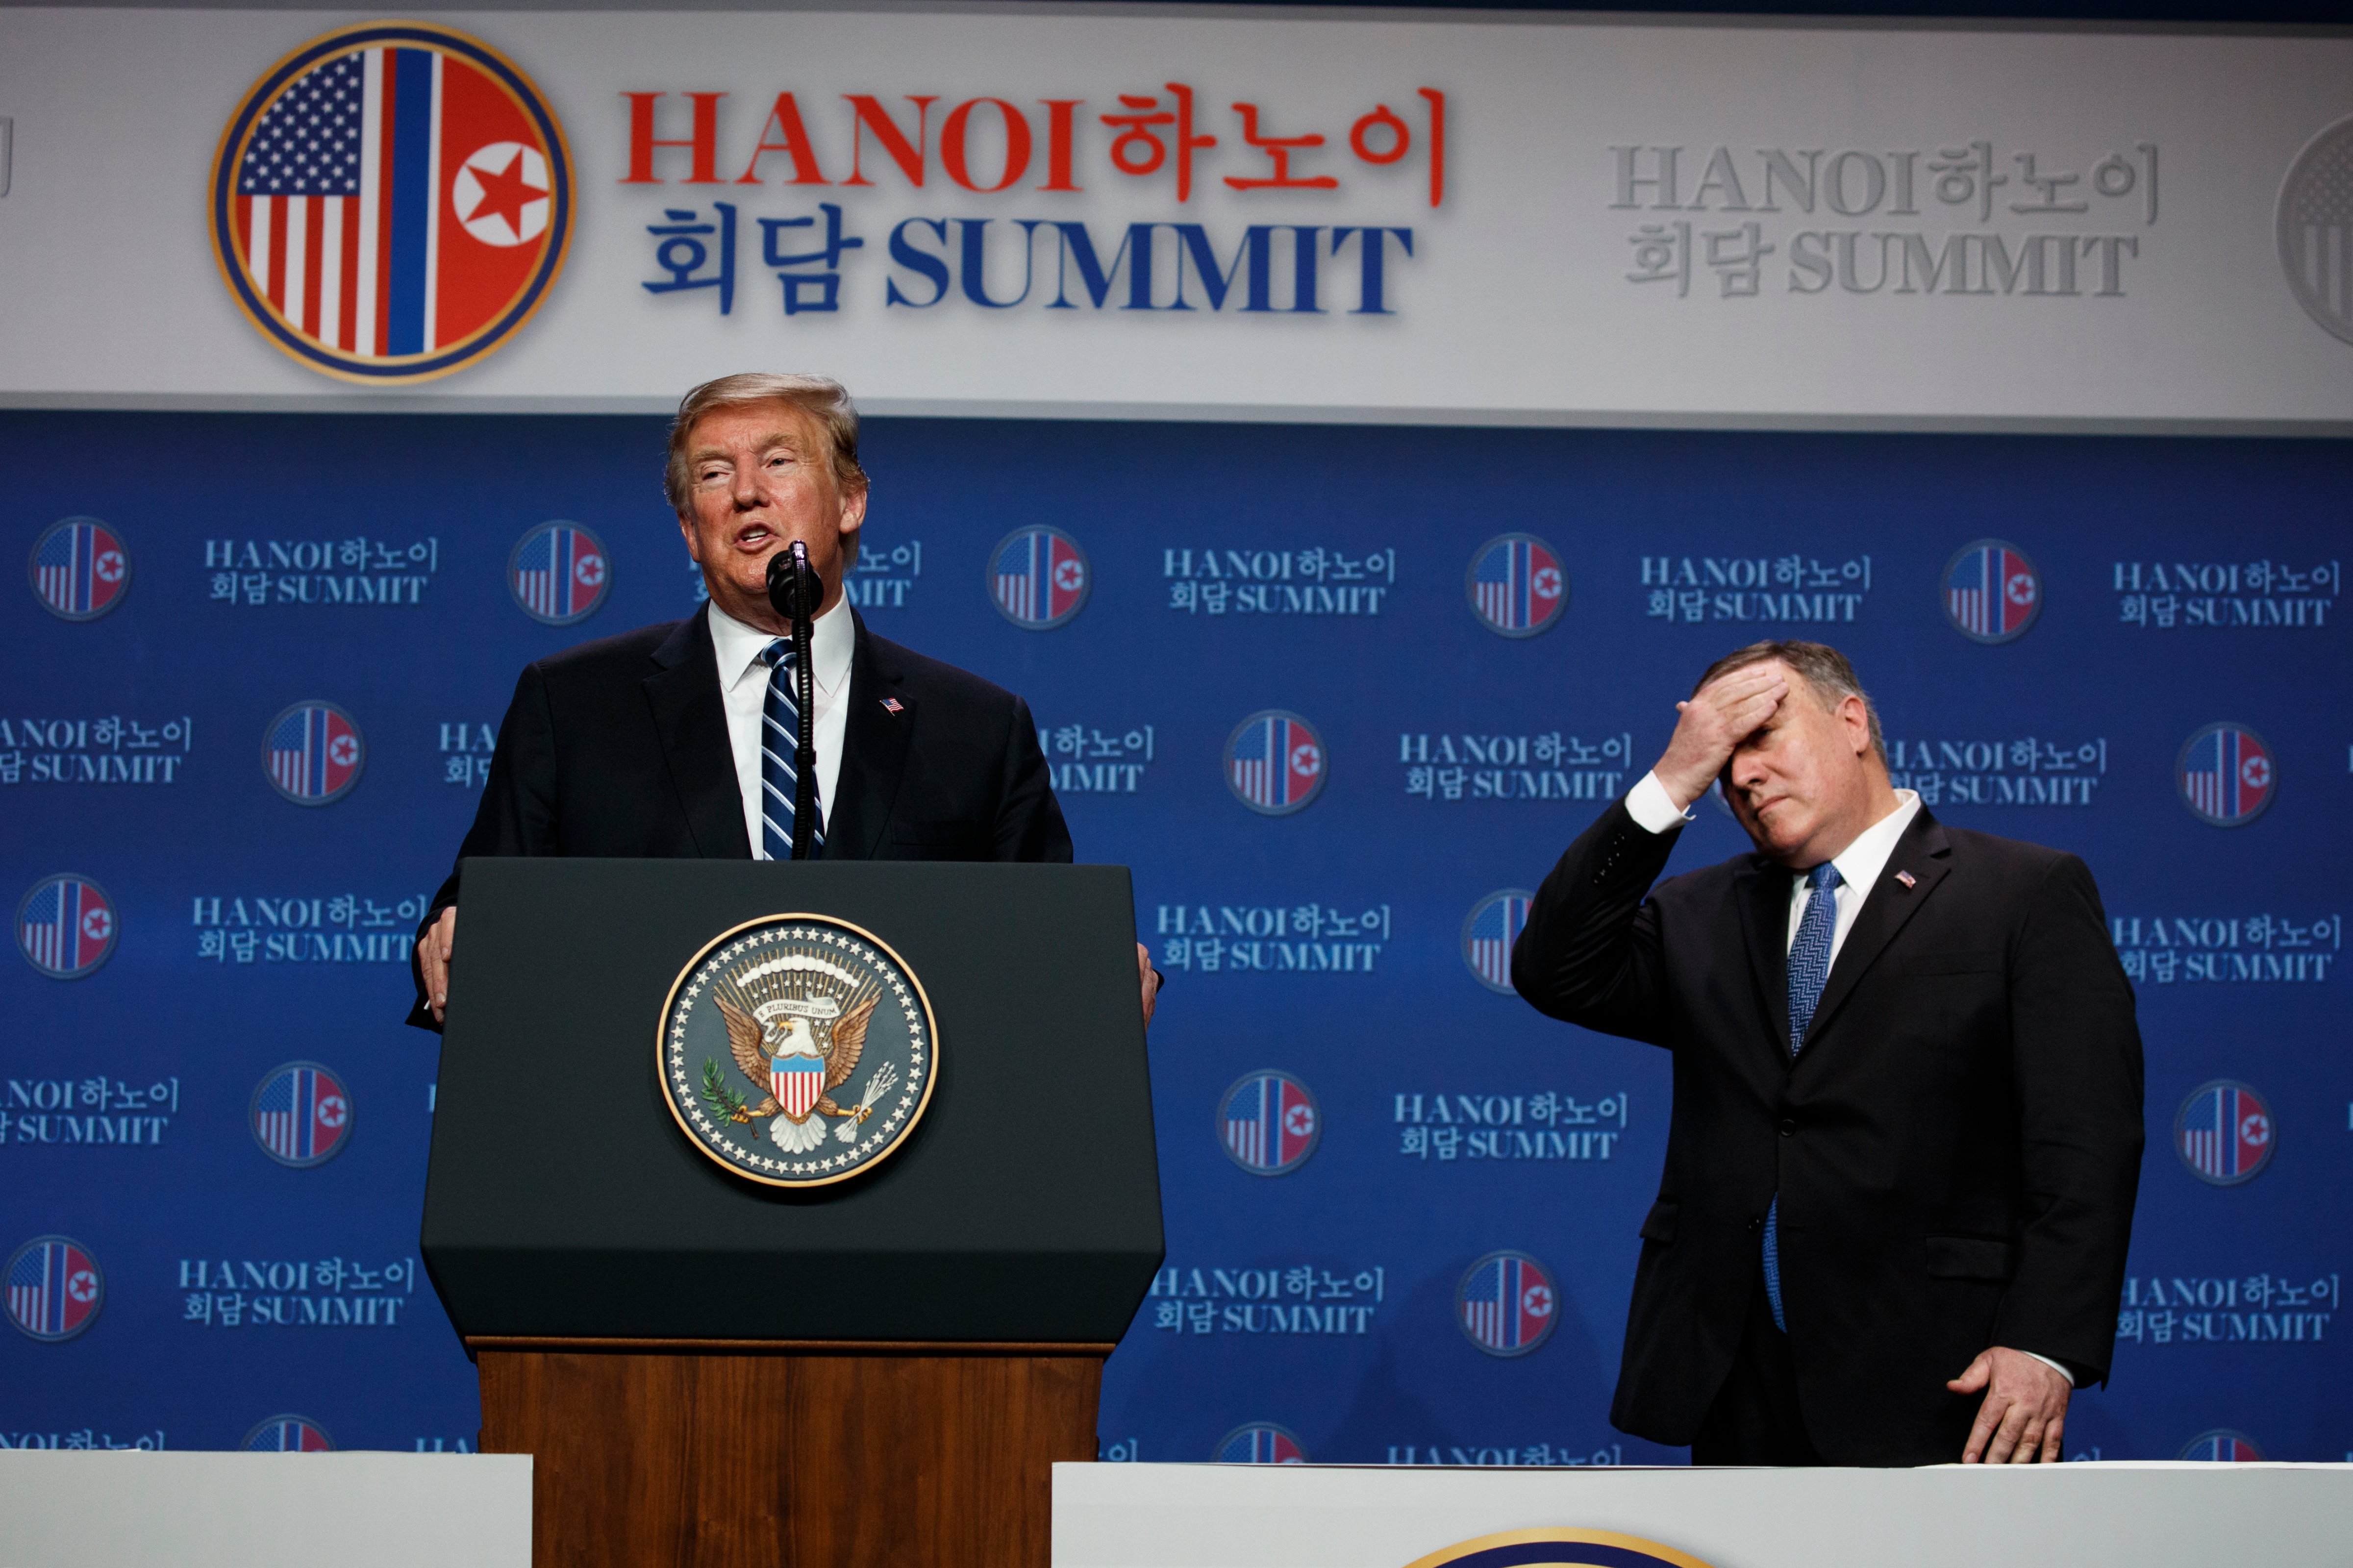 President Donald Trump speaks as Sec. of State Mike Pompeo looks on during a news conference after the summit on Feb. 28, 2019, in Hanoi Vietnam. (Evan Vucci—AP)